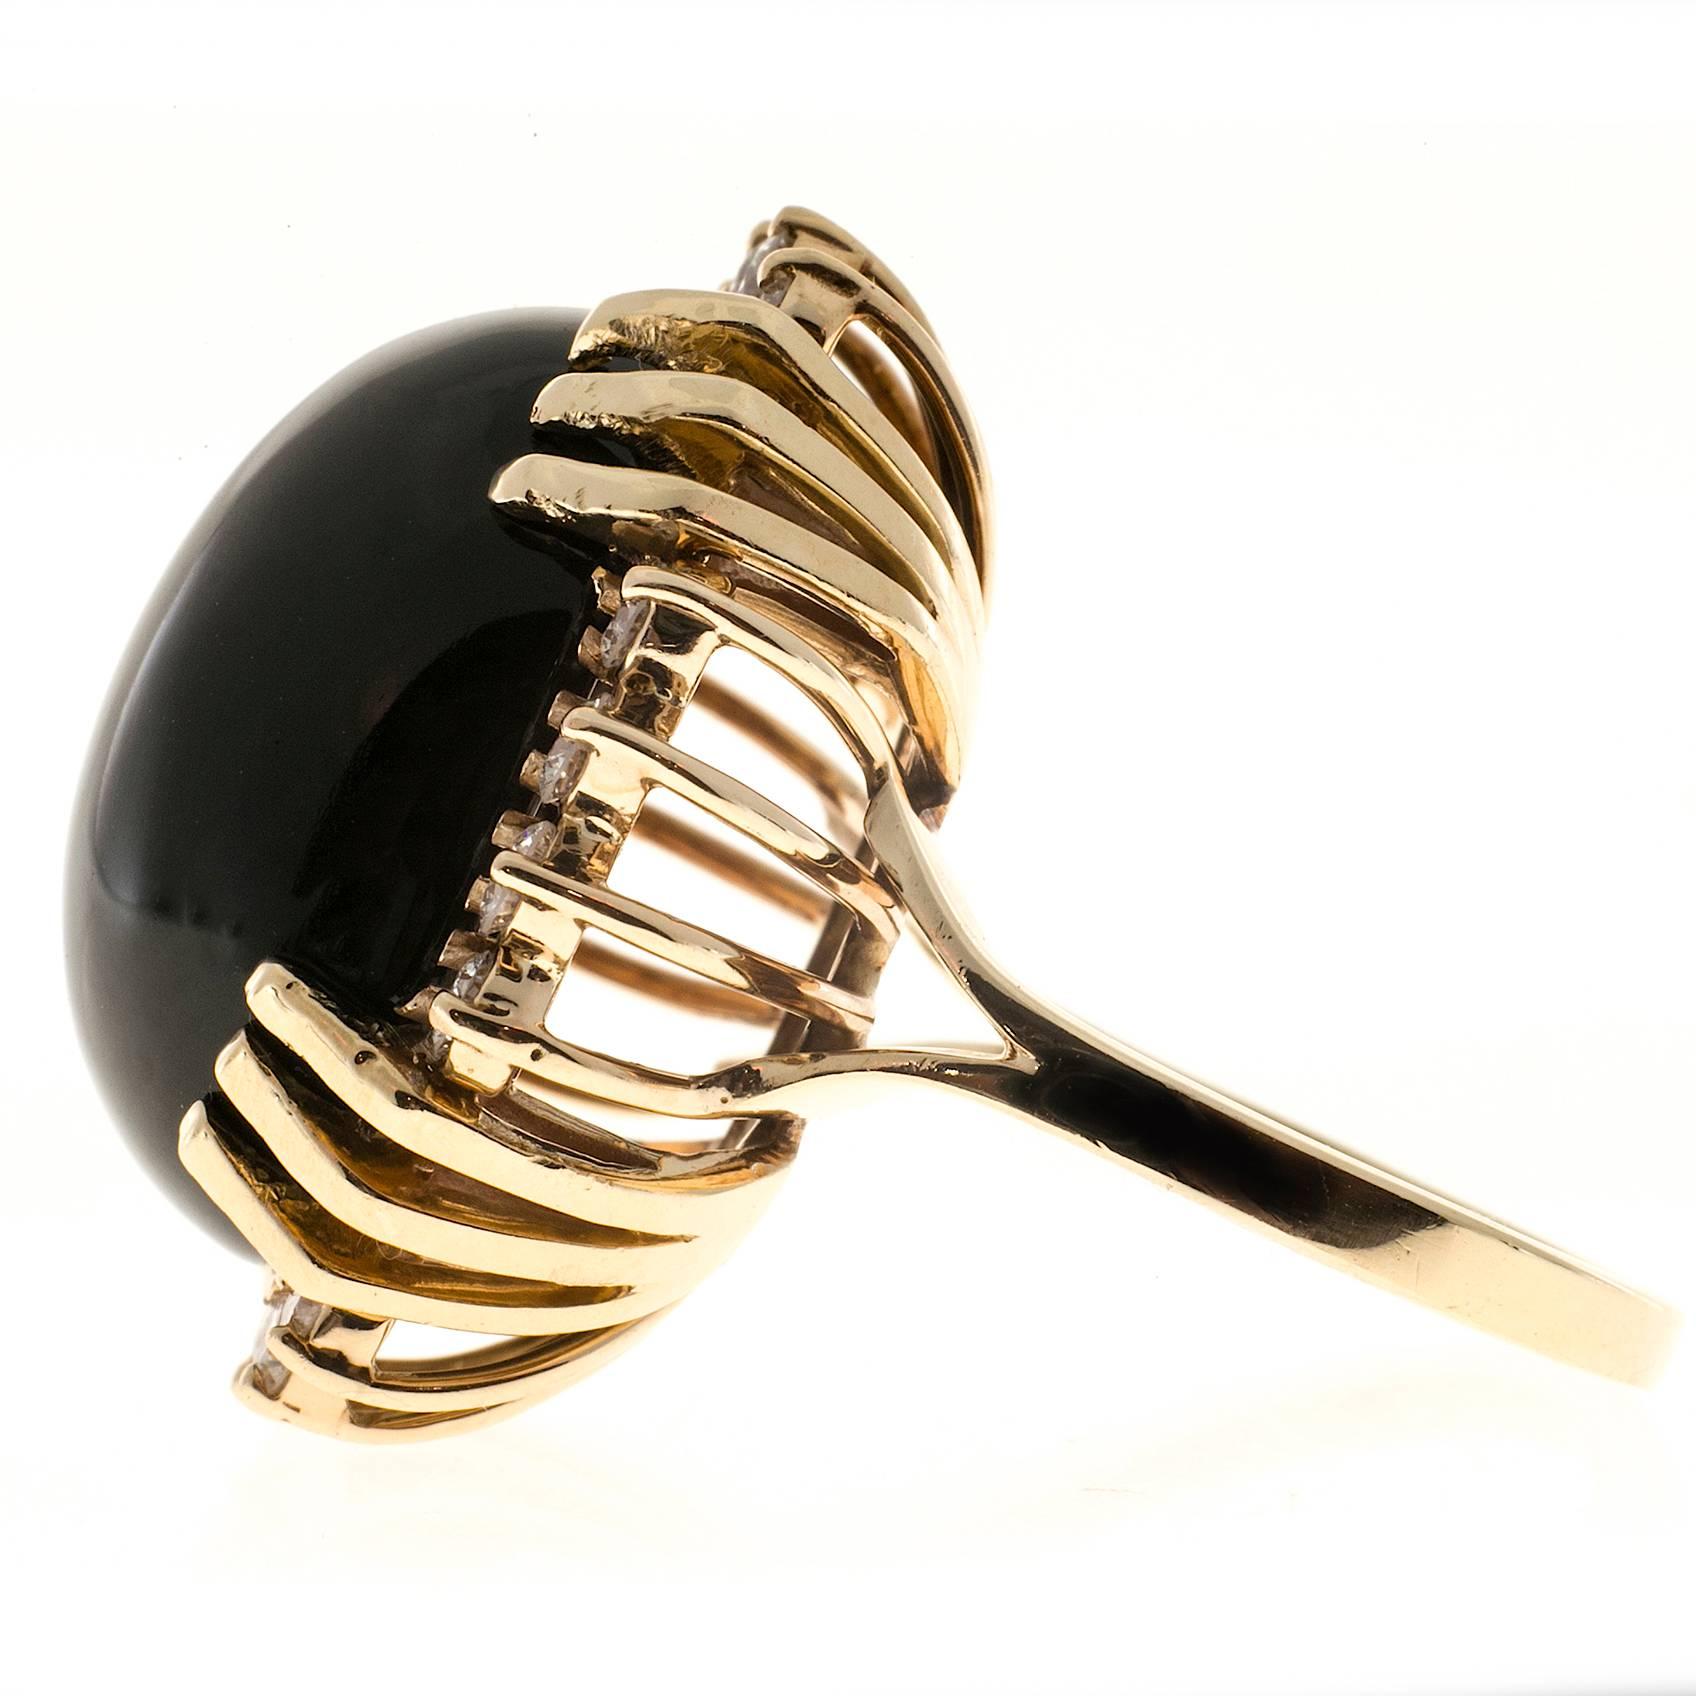 1960 high dome well-polished black Onyx with bright shiny well cut diamonds around it in a 14k yellow gold setting

1 oval black Onyx, approx. total weight 18cts, 21 x 17.6 x 8mm
16 full cut round diamonds, approx. total weight .80cts, H, VS1 to